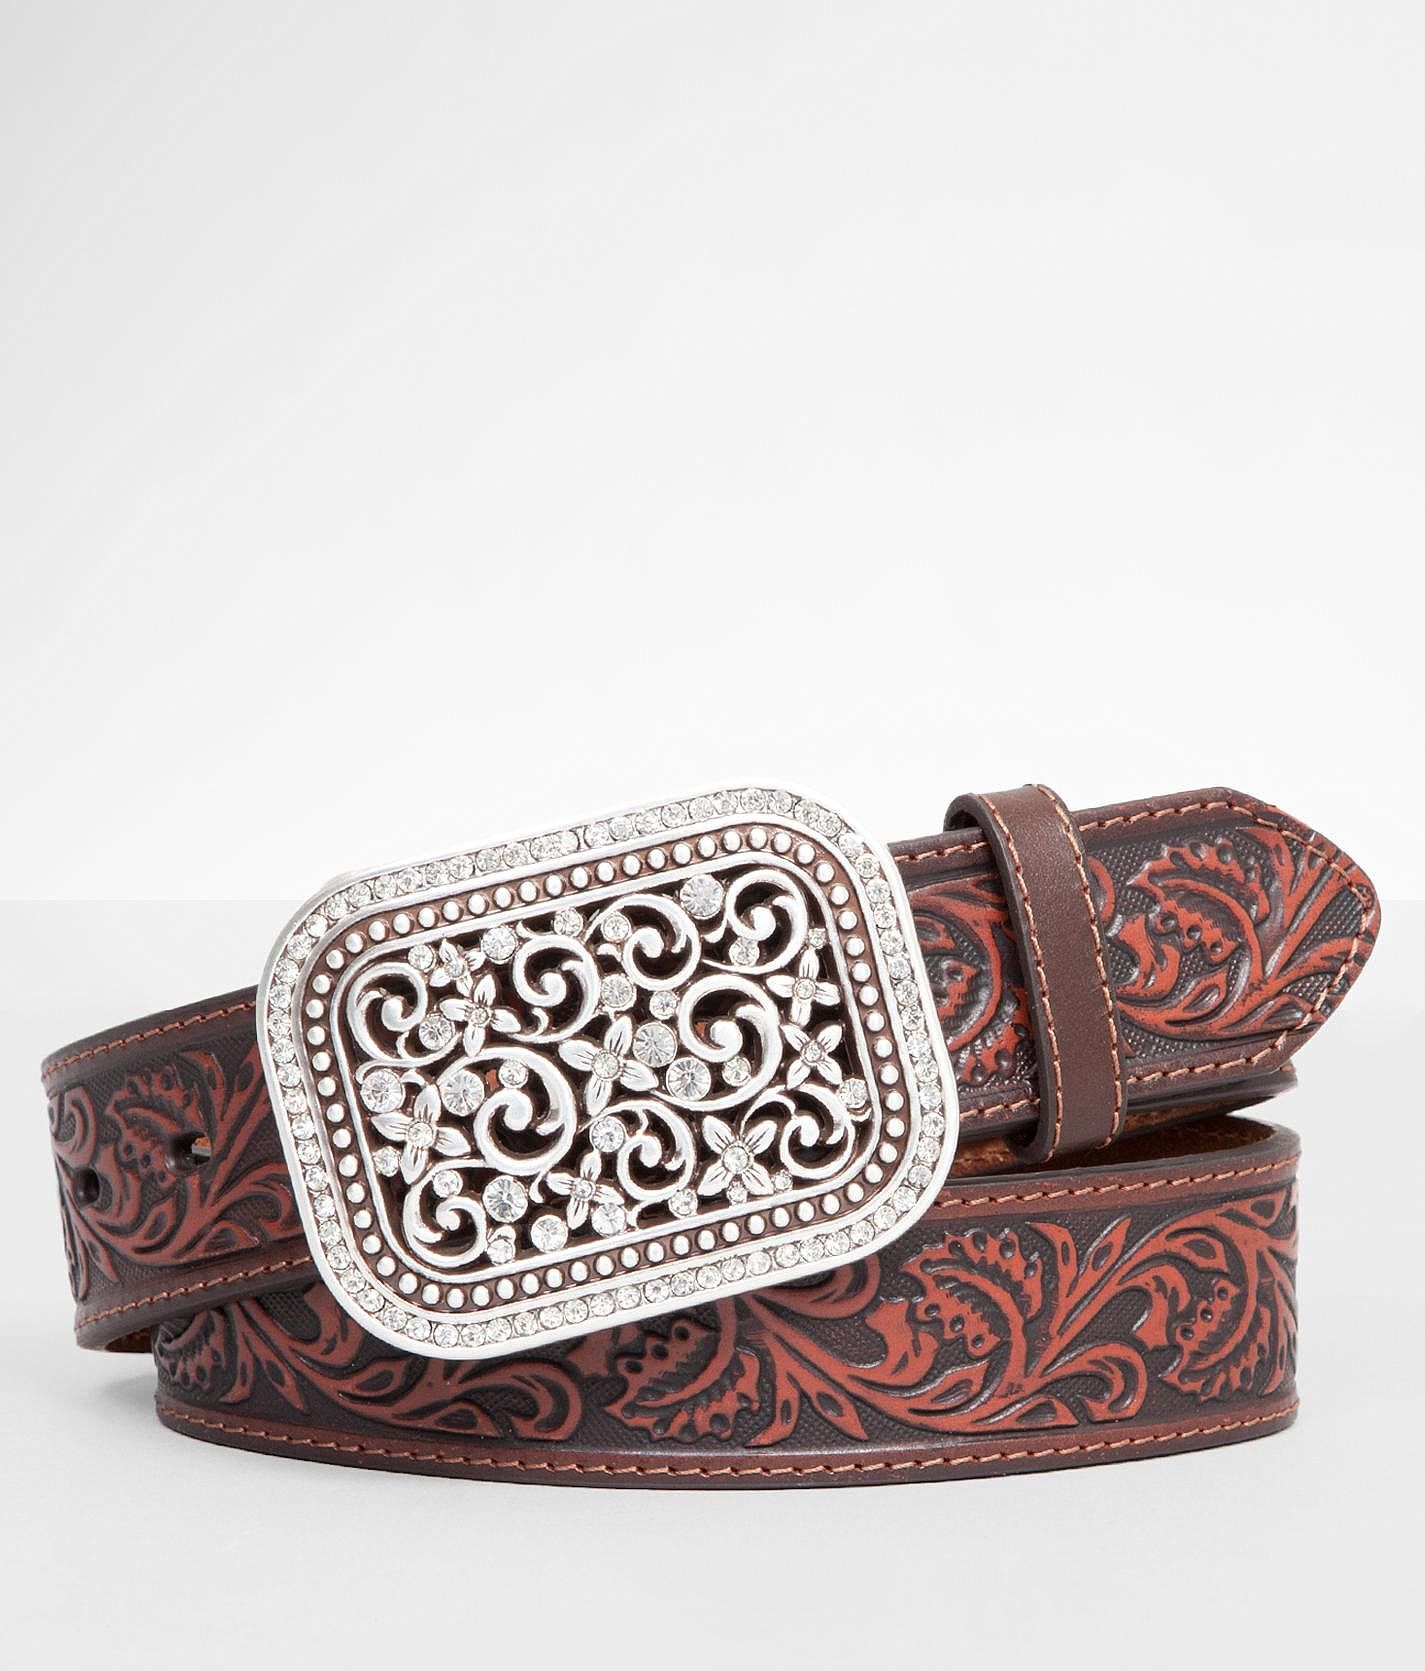 Ariat Embossed Leather Belt  - Brown - female - Size: Large